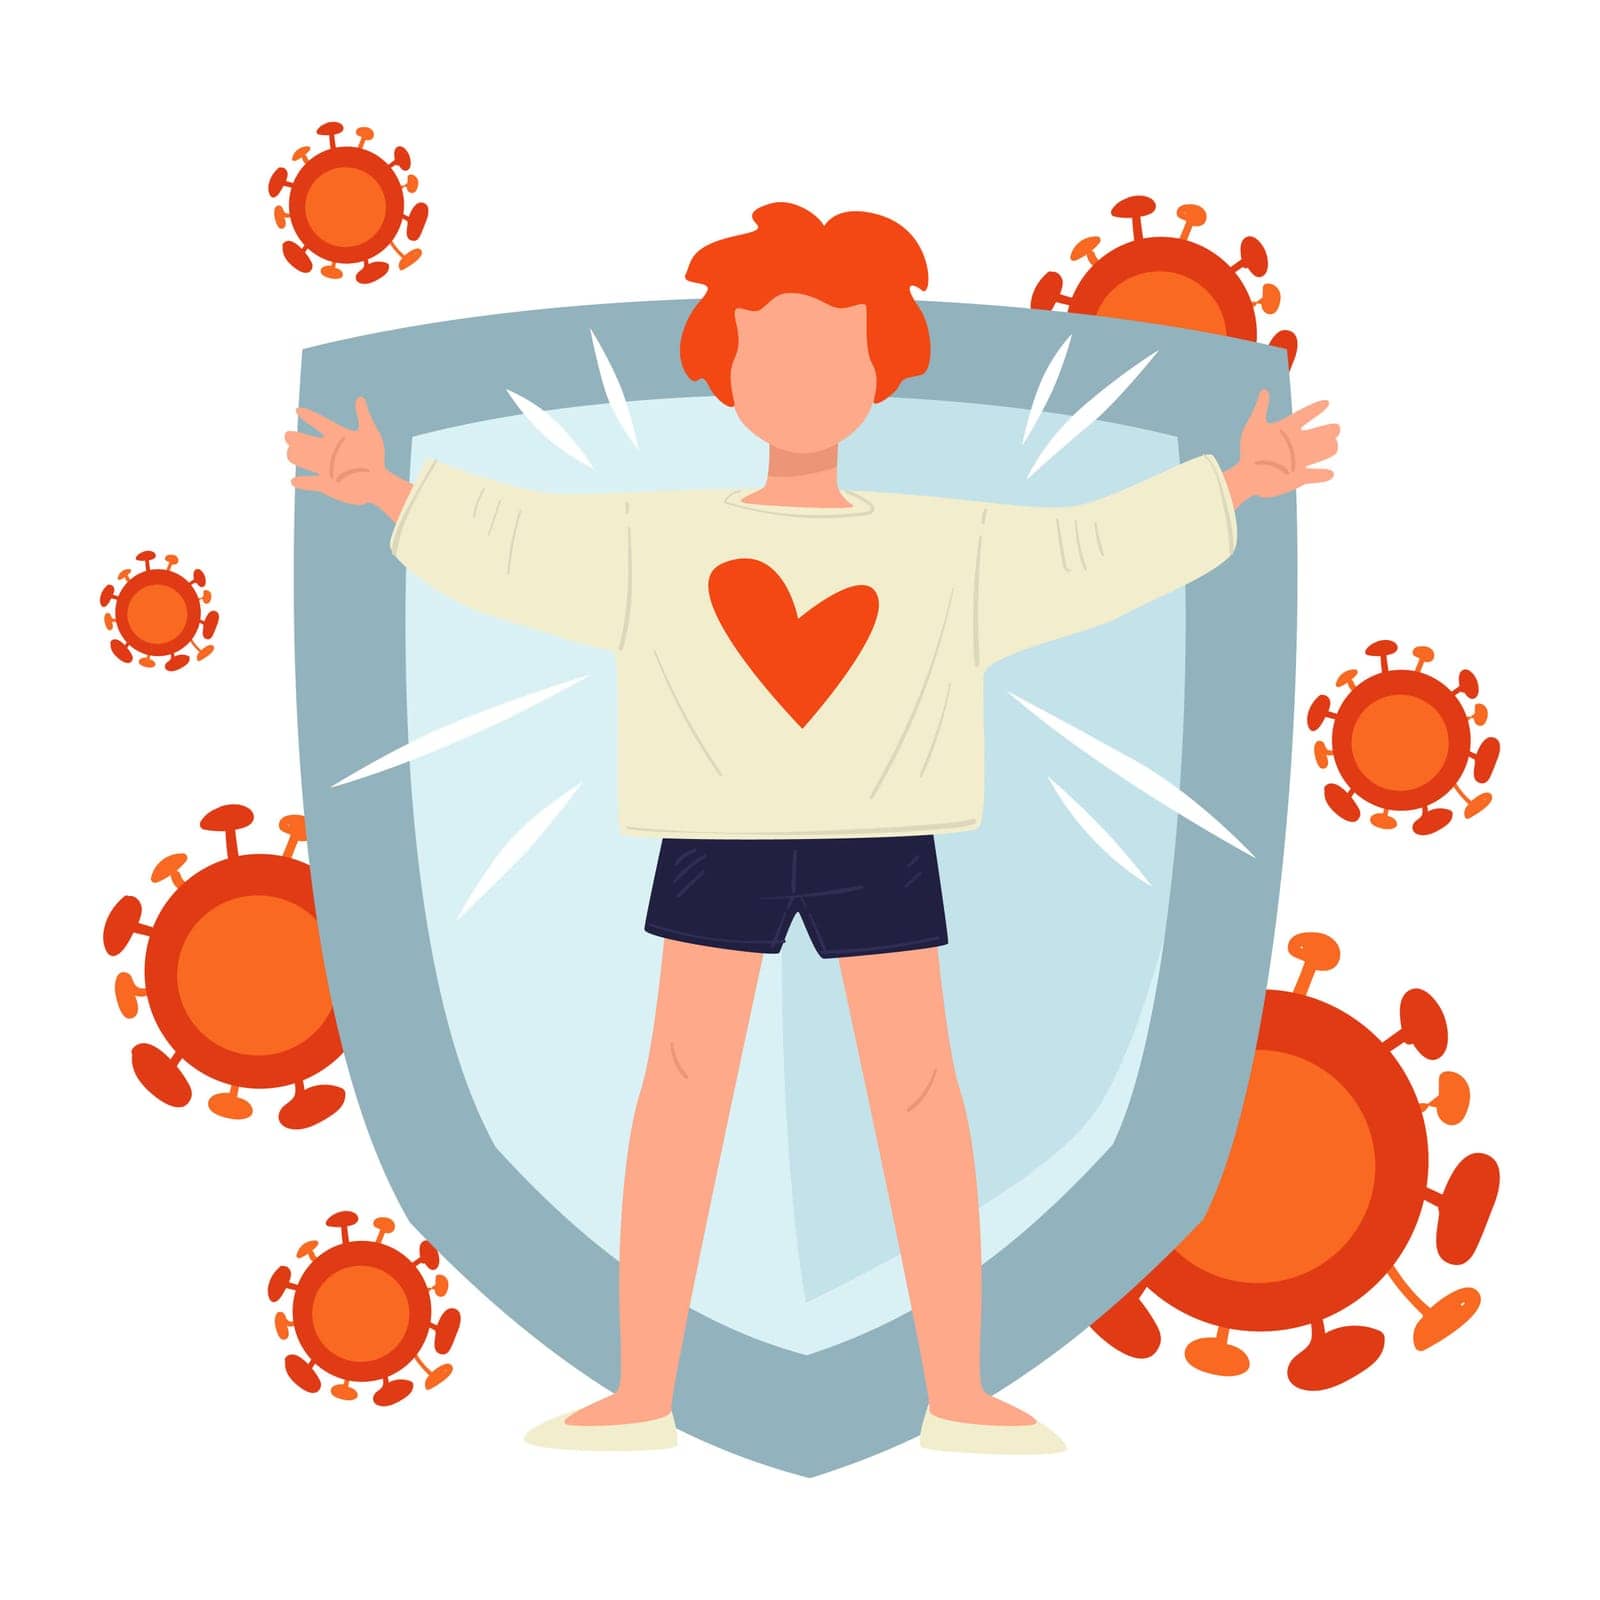 Woman protected by shield, isolated icon of personage with strong immune system protecting from coronavirus. Covid19 recovery or treatment, healthcare and defense or organism, vector in flat style